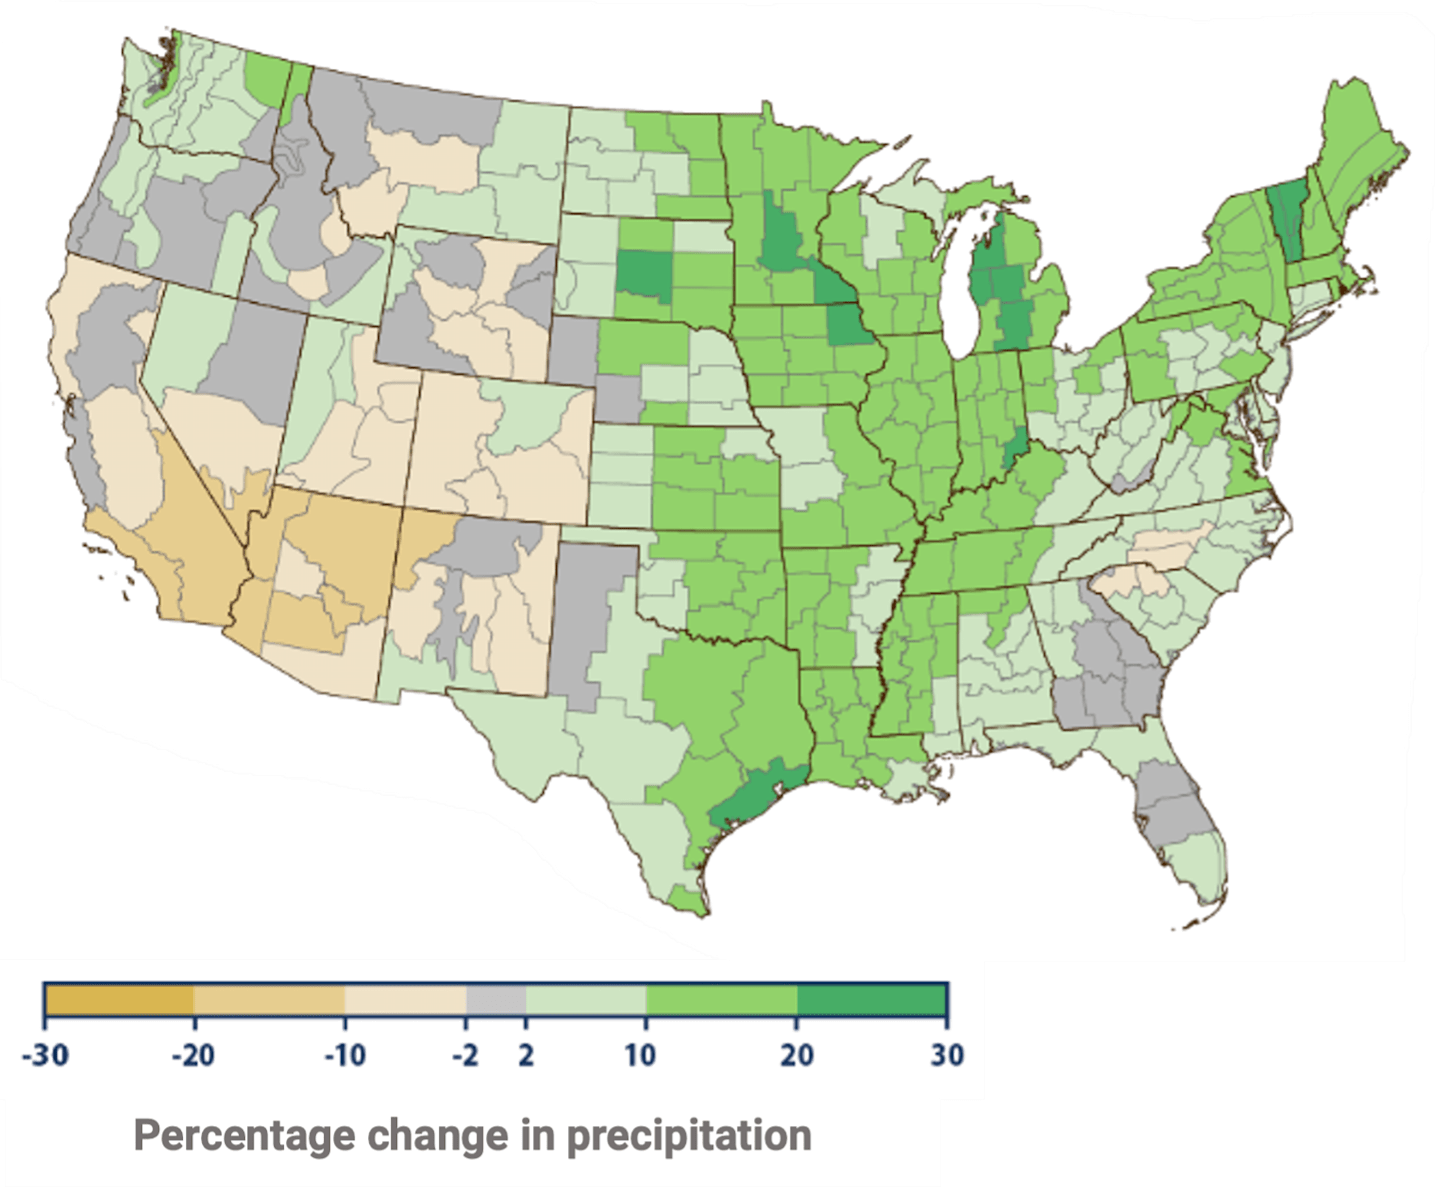 Map of the United States showing the changes in precipitation. The midwest will get more precipitation than the rest of the country.